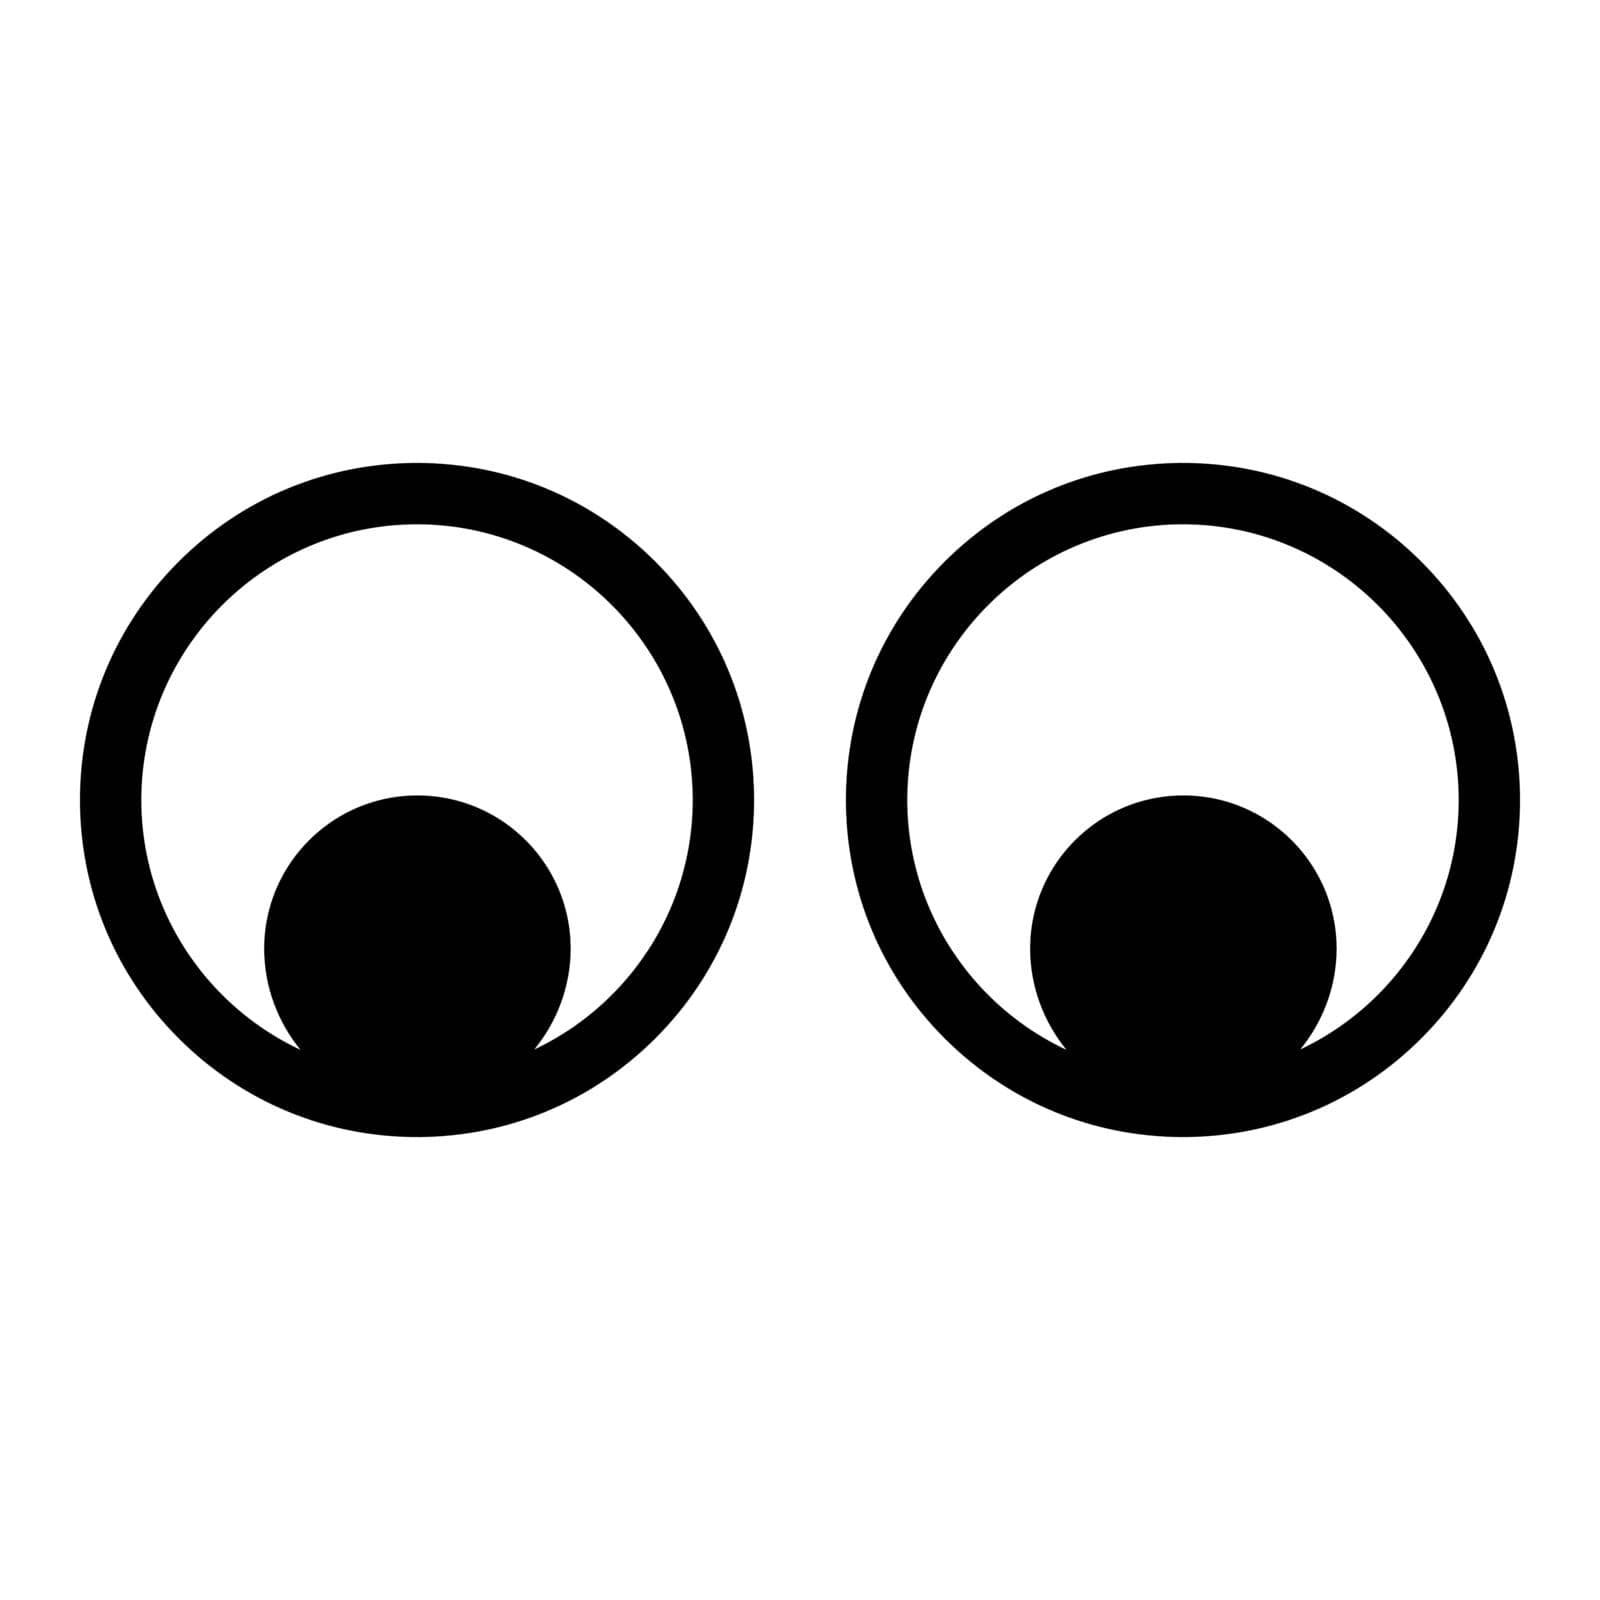 Eyes Look concept Two pairs eye View icon black color vector illustration flat style simple image